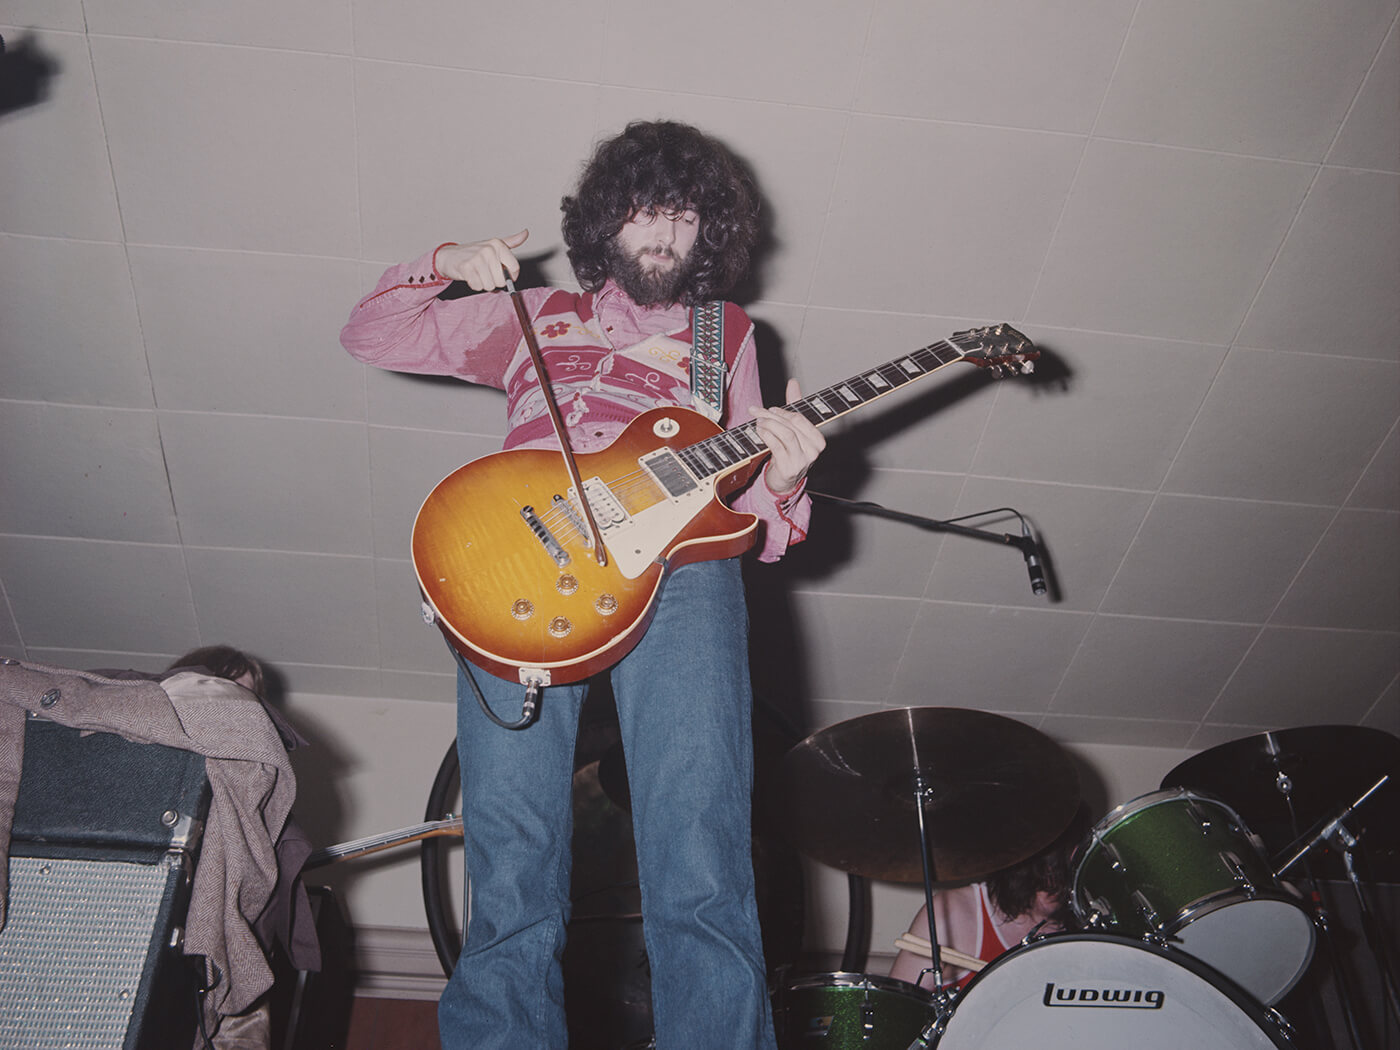 Jimmy Page playing a Gibson Les Paul with a violin bow in 1969, photo by Michael Putland/Getty Images